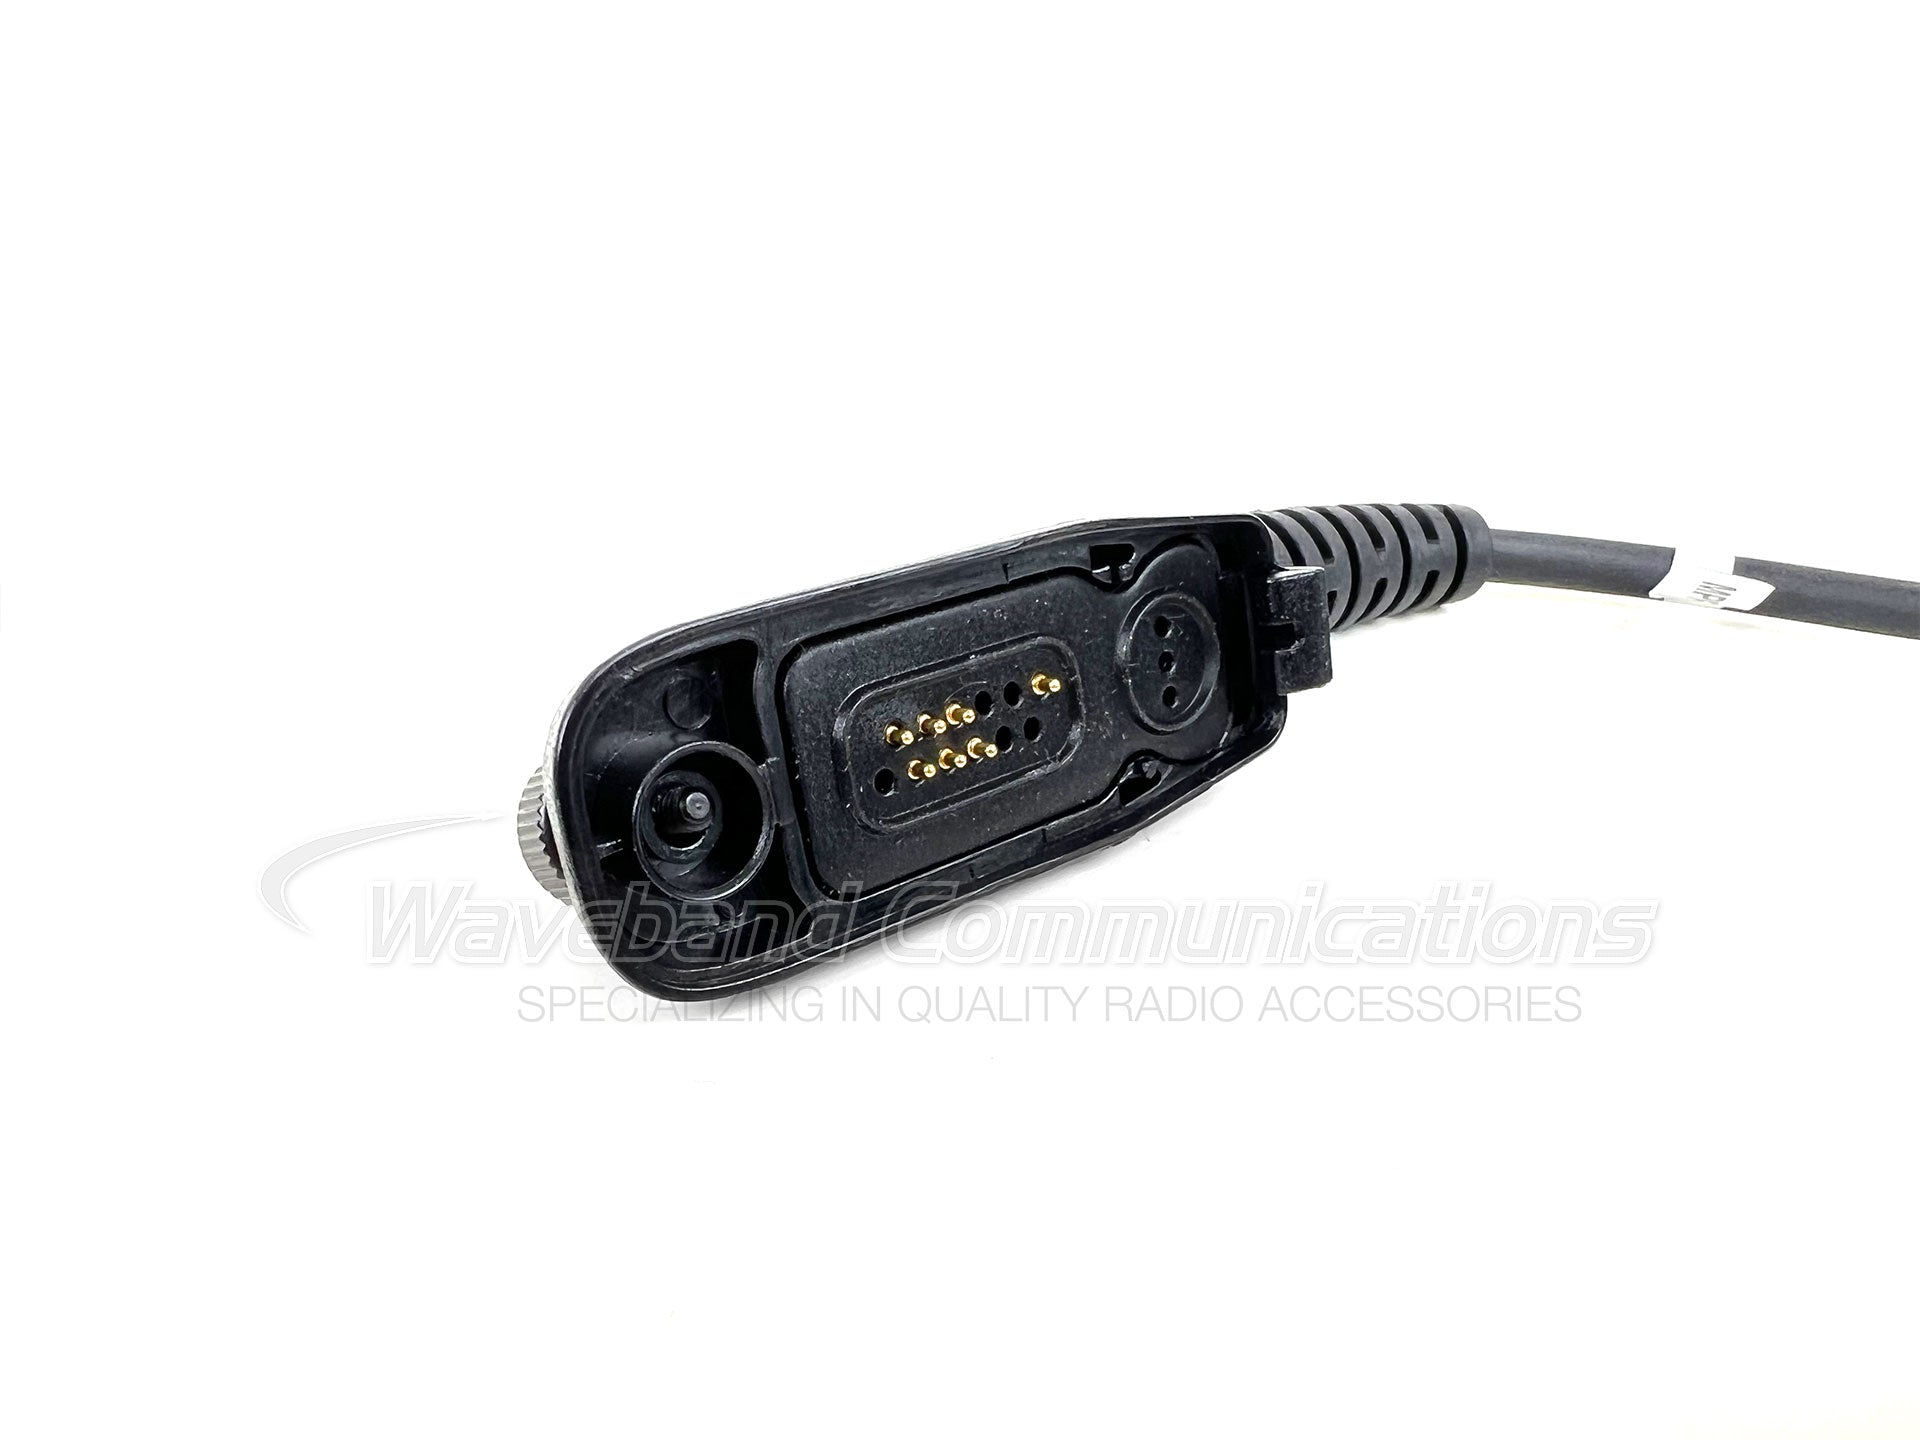 PMMN4069 Comparable Remote Speaker Microphone for Motorola APX